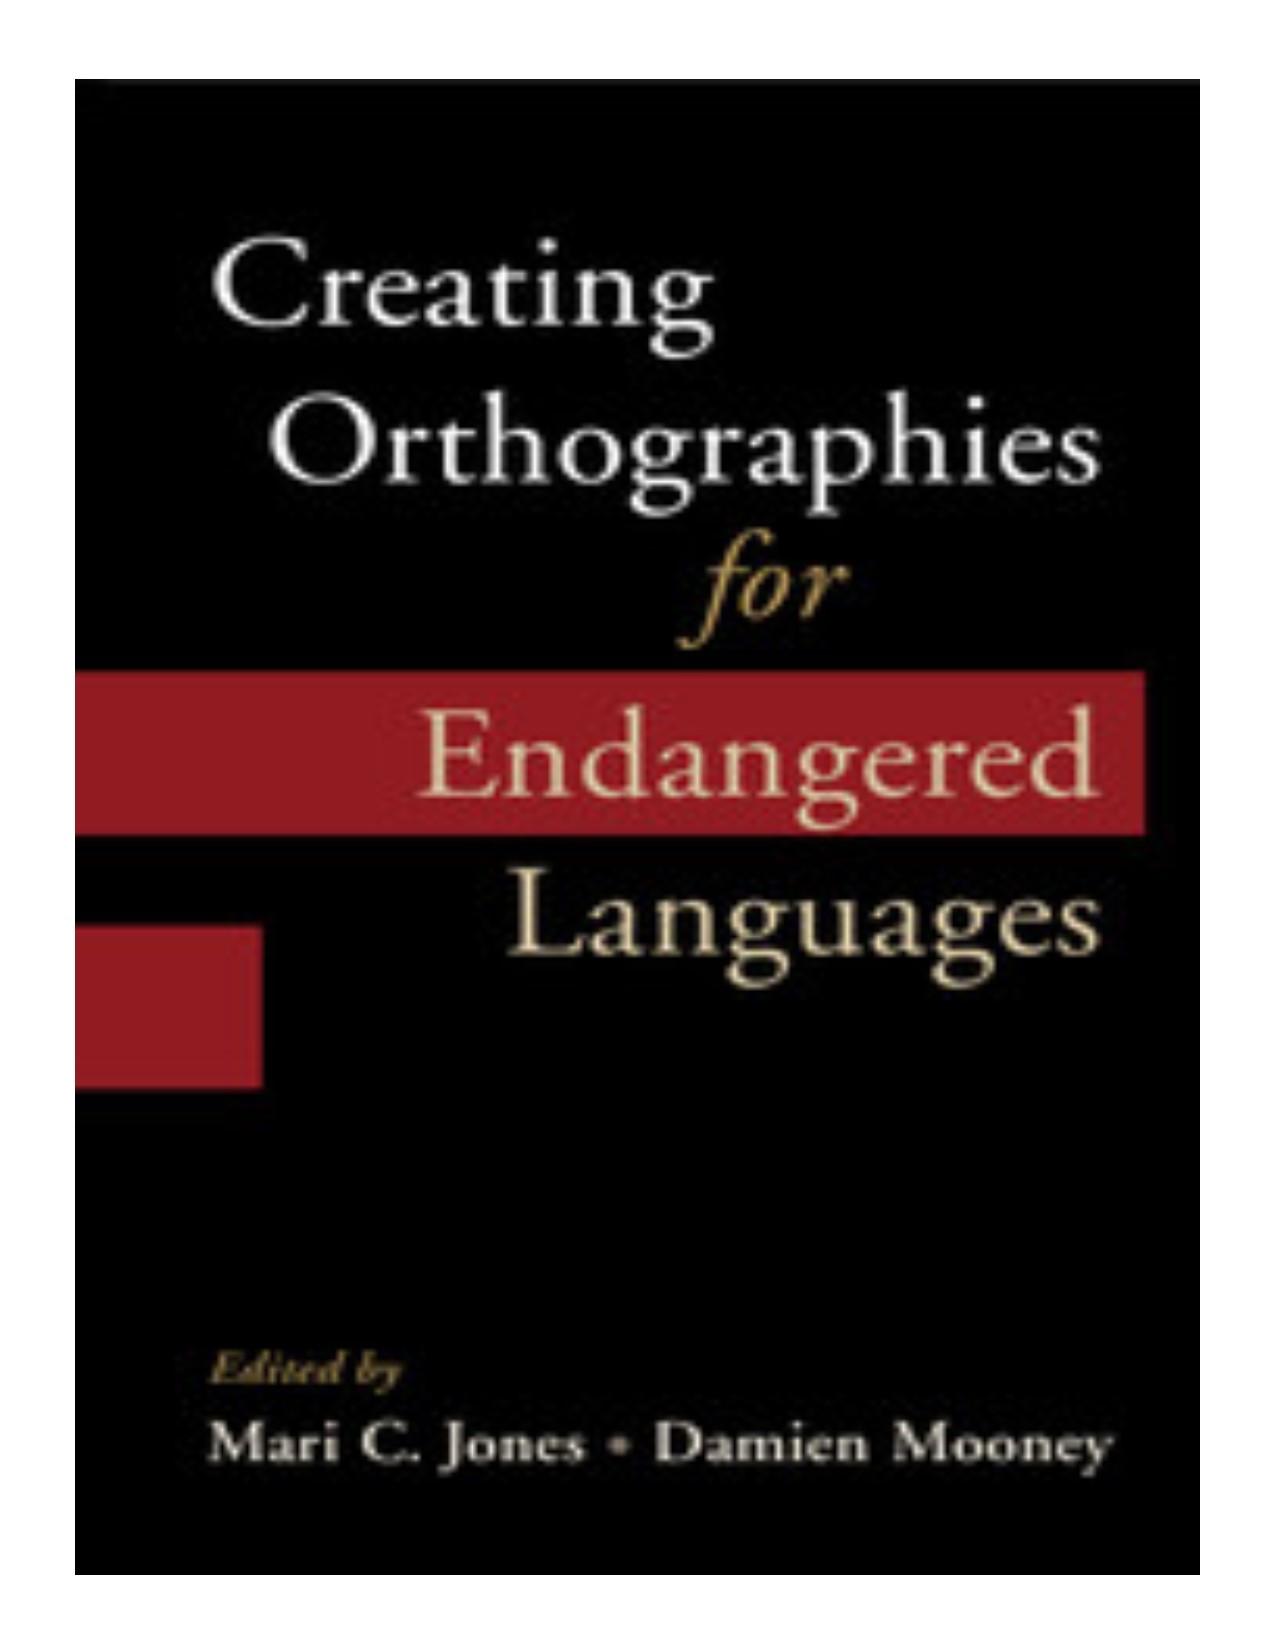 Creating orthographies for endangered languages